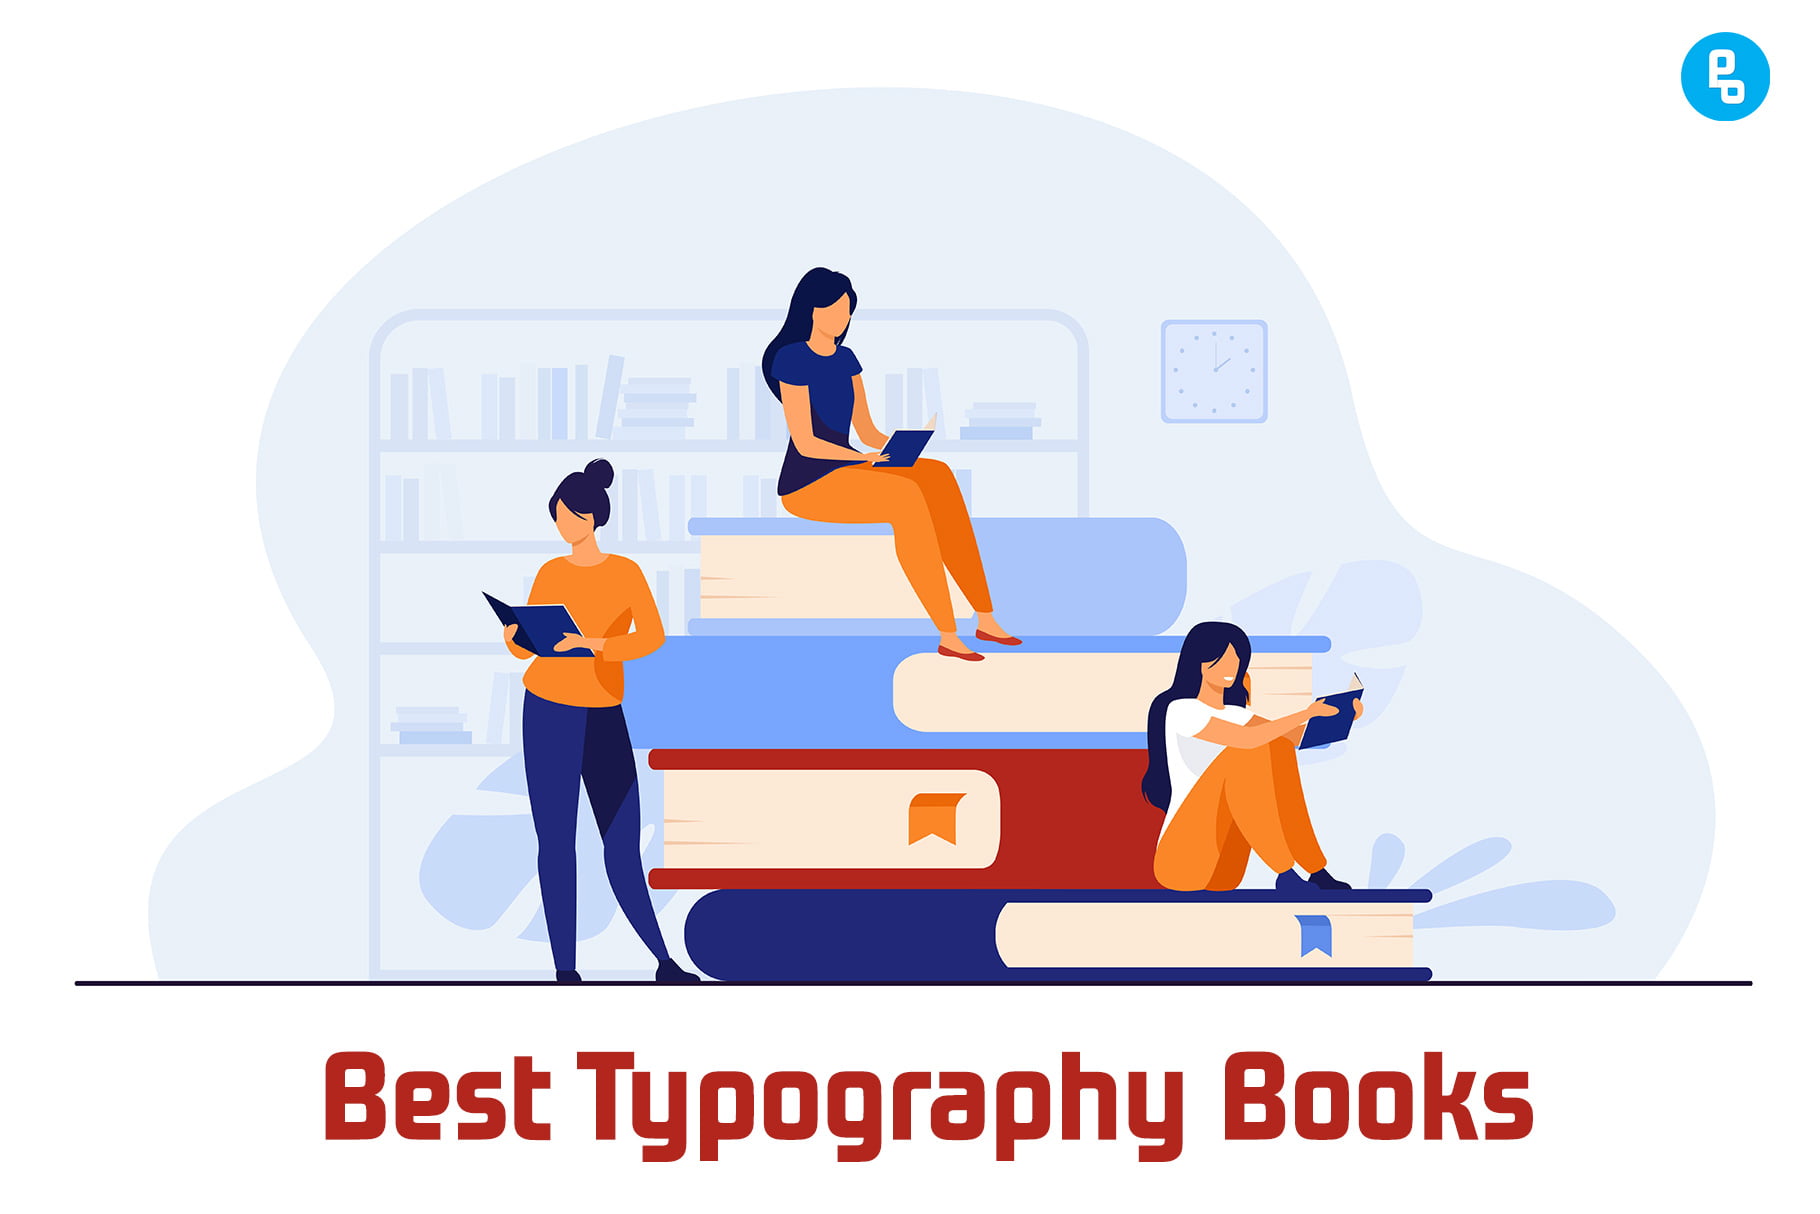 We’ve compiled a list of some of the best books on typography that will make you a better designer. These books are perfect for anyone who is new to the field, but they also contain valuable information for more experienced designers as well.